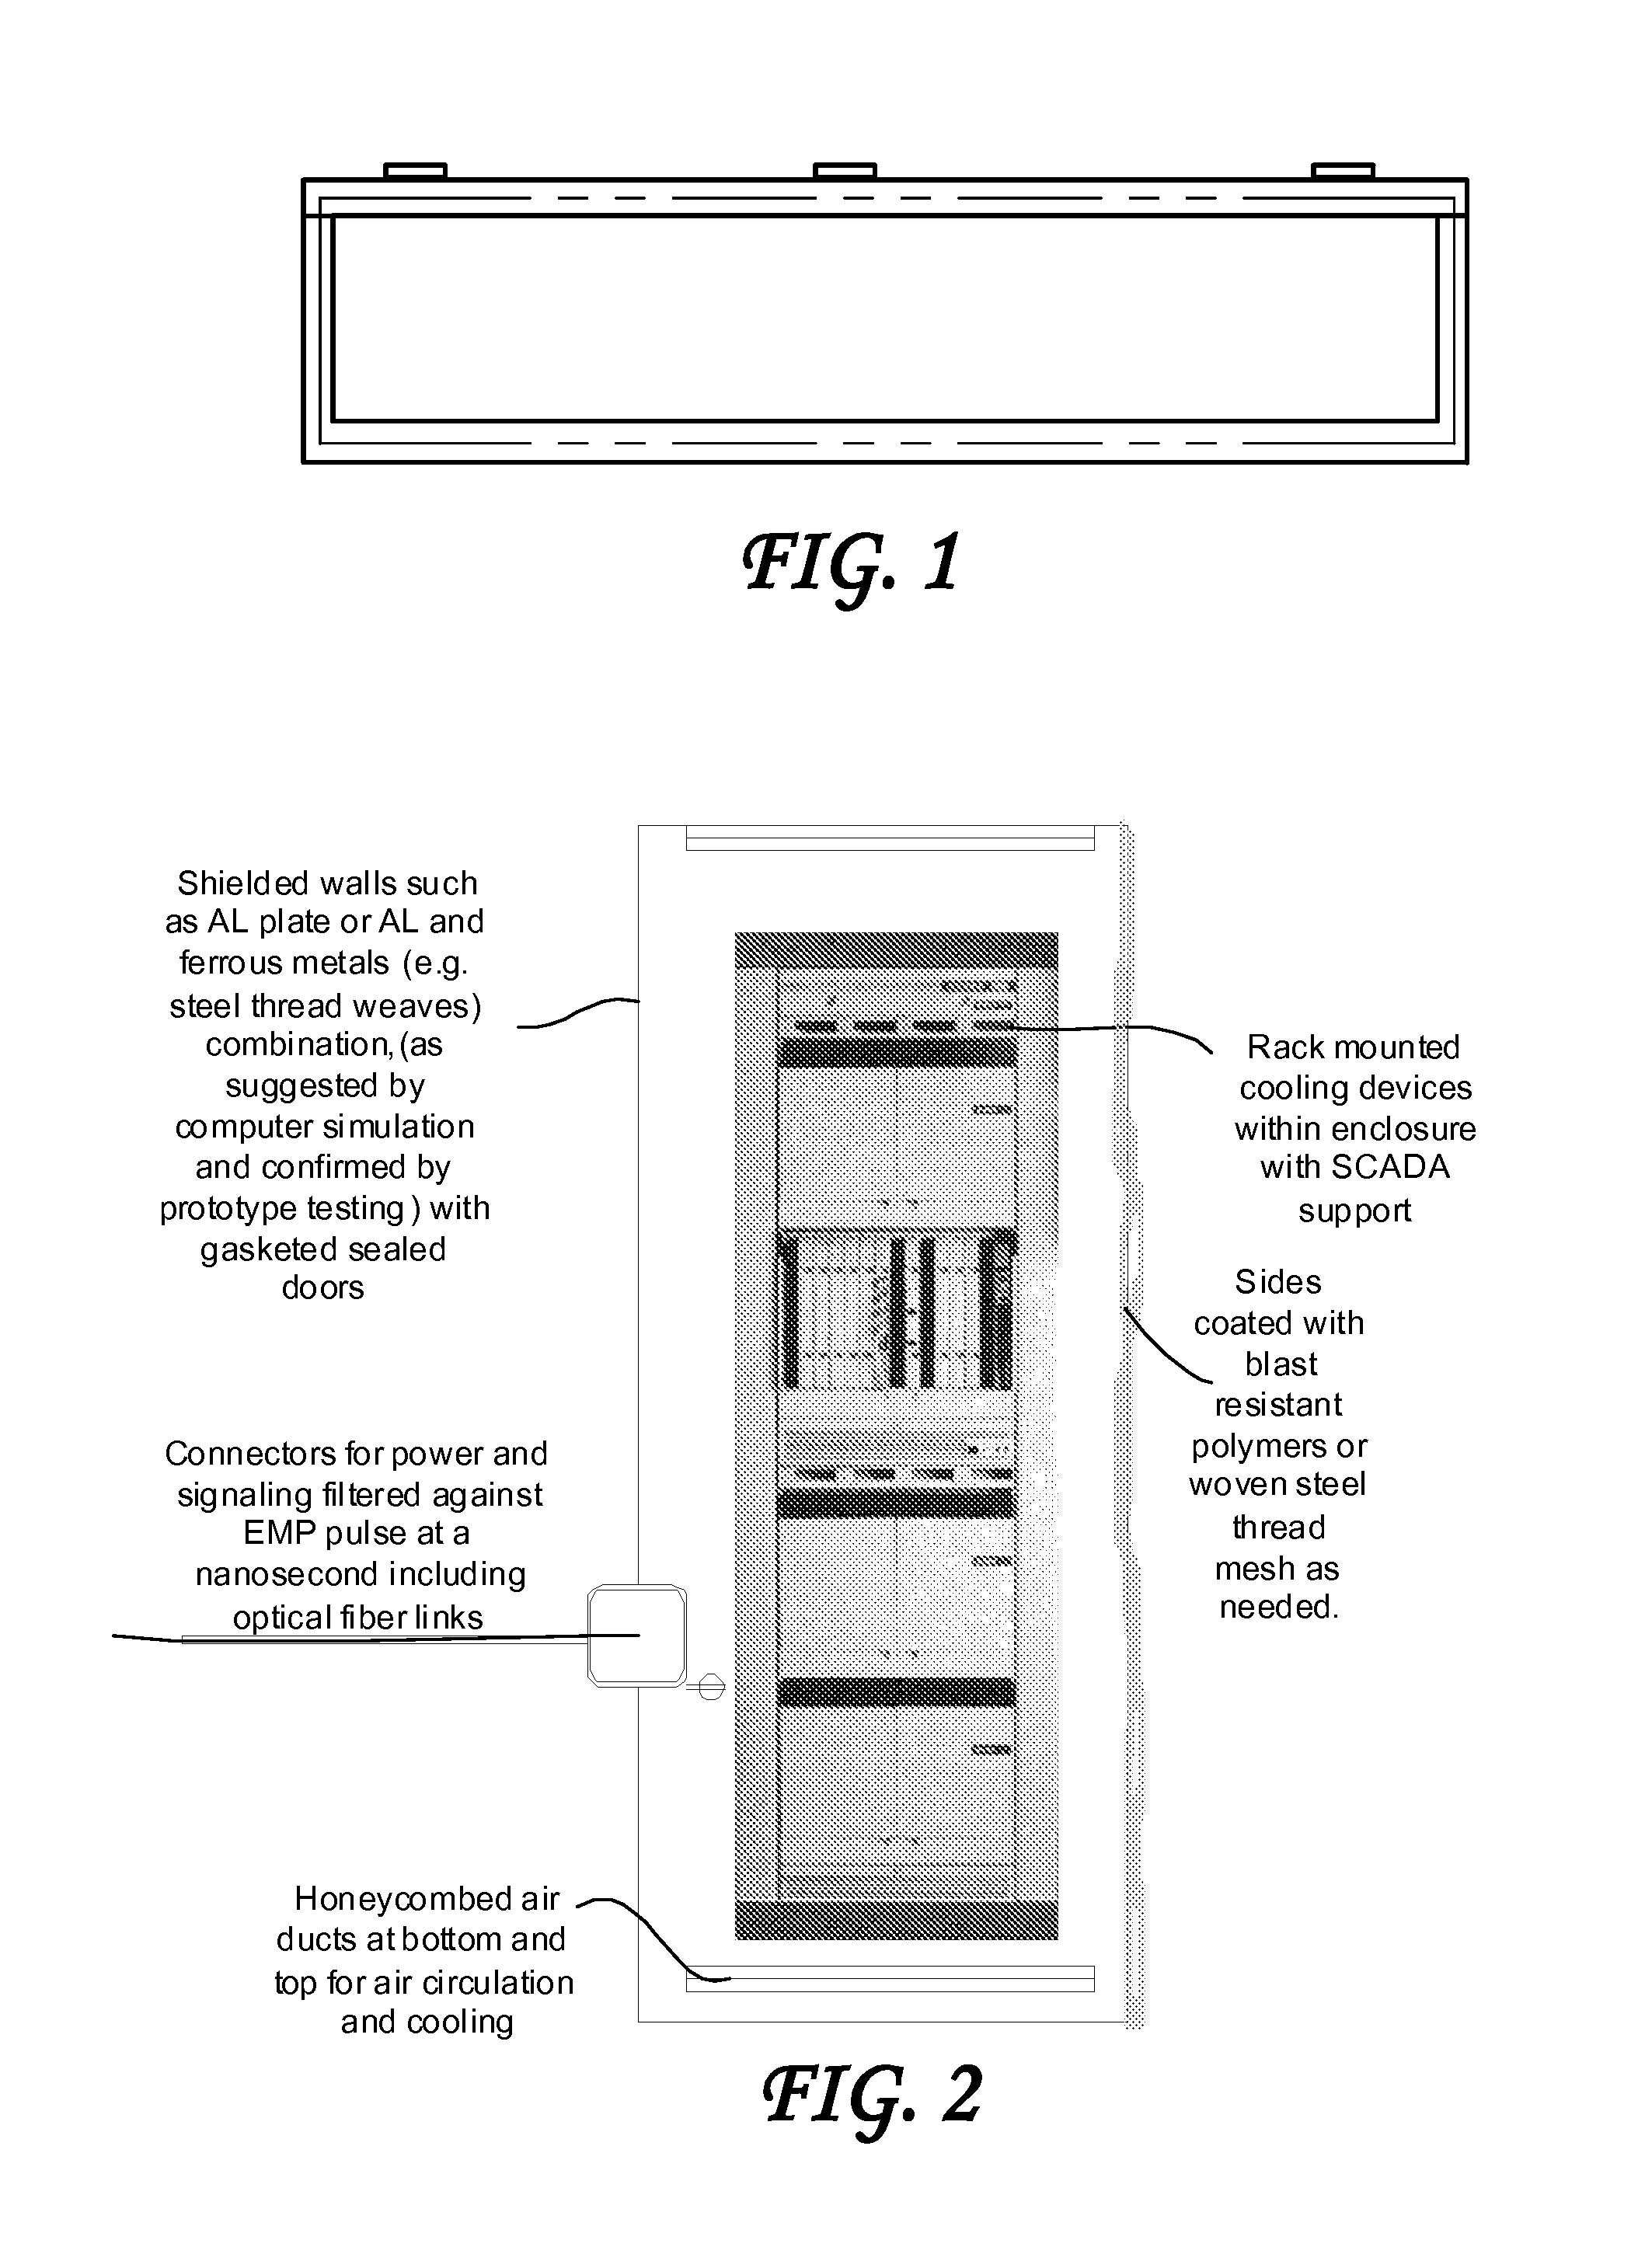 System and method for providing certifiable electromagnetic pulse and RFI protection through mass-produced shielded containers and rooms